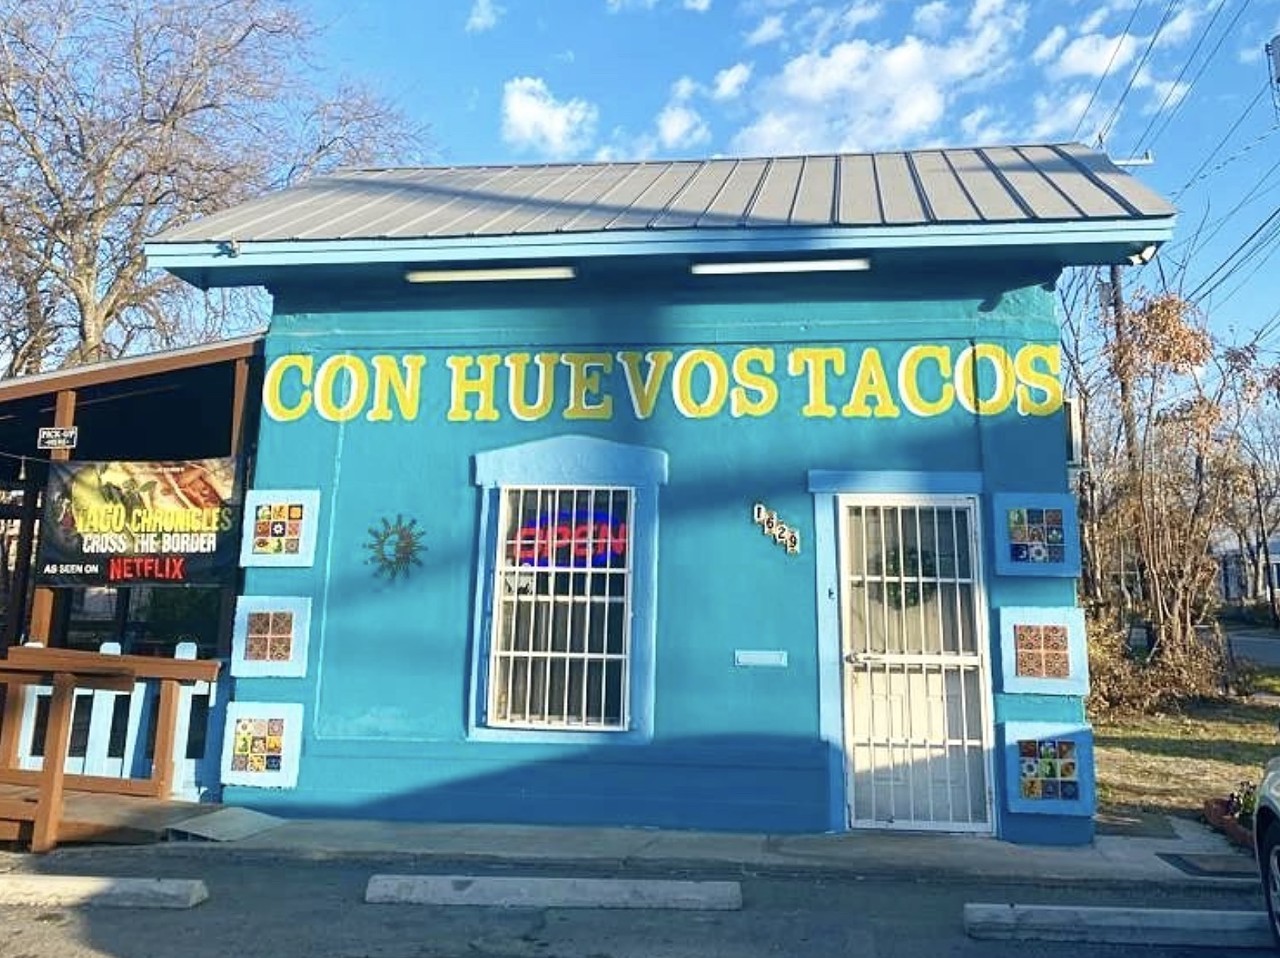 Con Huevos Tacos
1629 E. Houston St., (210) 229-9295, conhuevostacos.com
Con Huevos offers traditional tacos with creative twists and a selection of vegetarian and vegan options. Their patio offers an incredible view of the San Antonio skyline and iconic murals surround the building.The restaurant was also featured in the third season of Netflix’s Taco Chronicles.